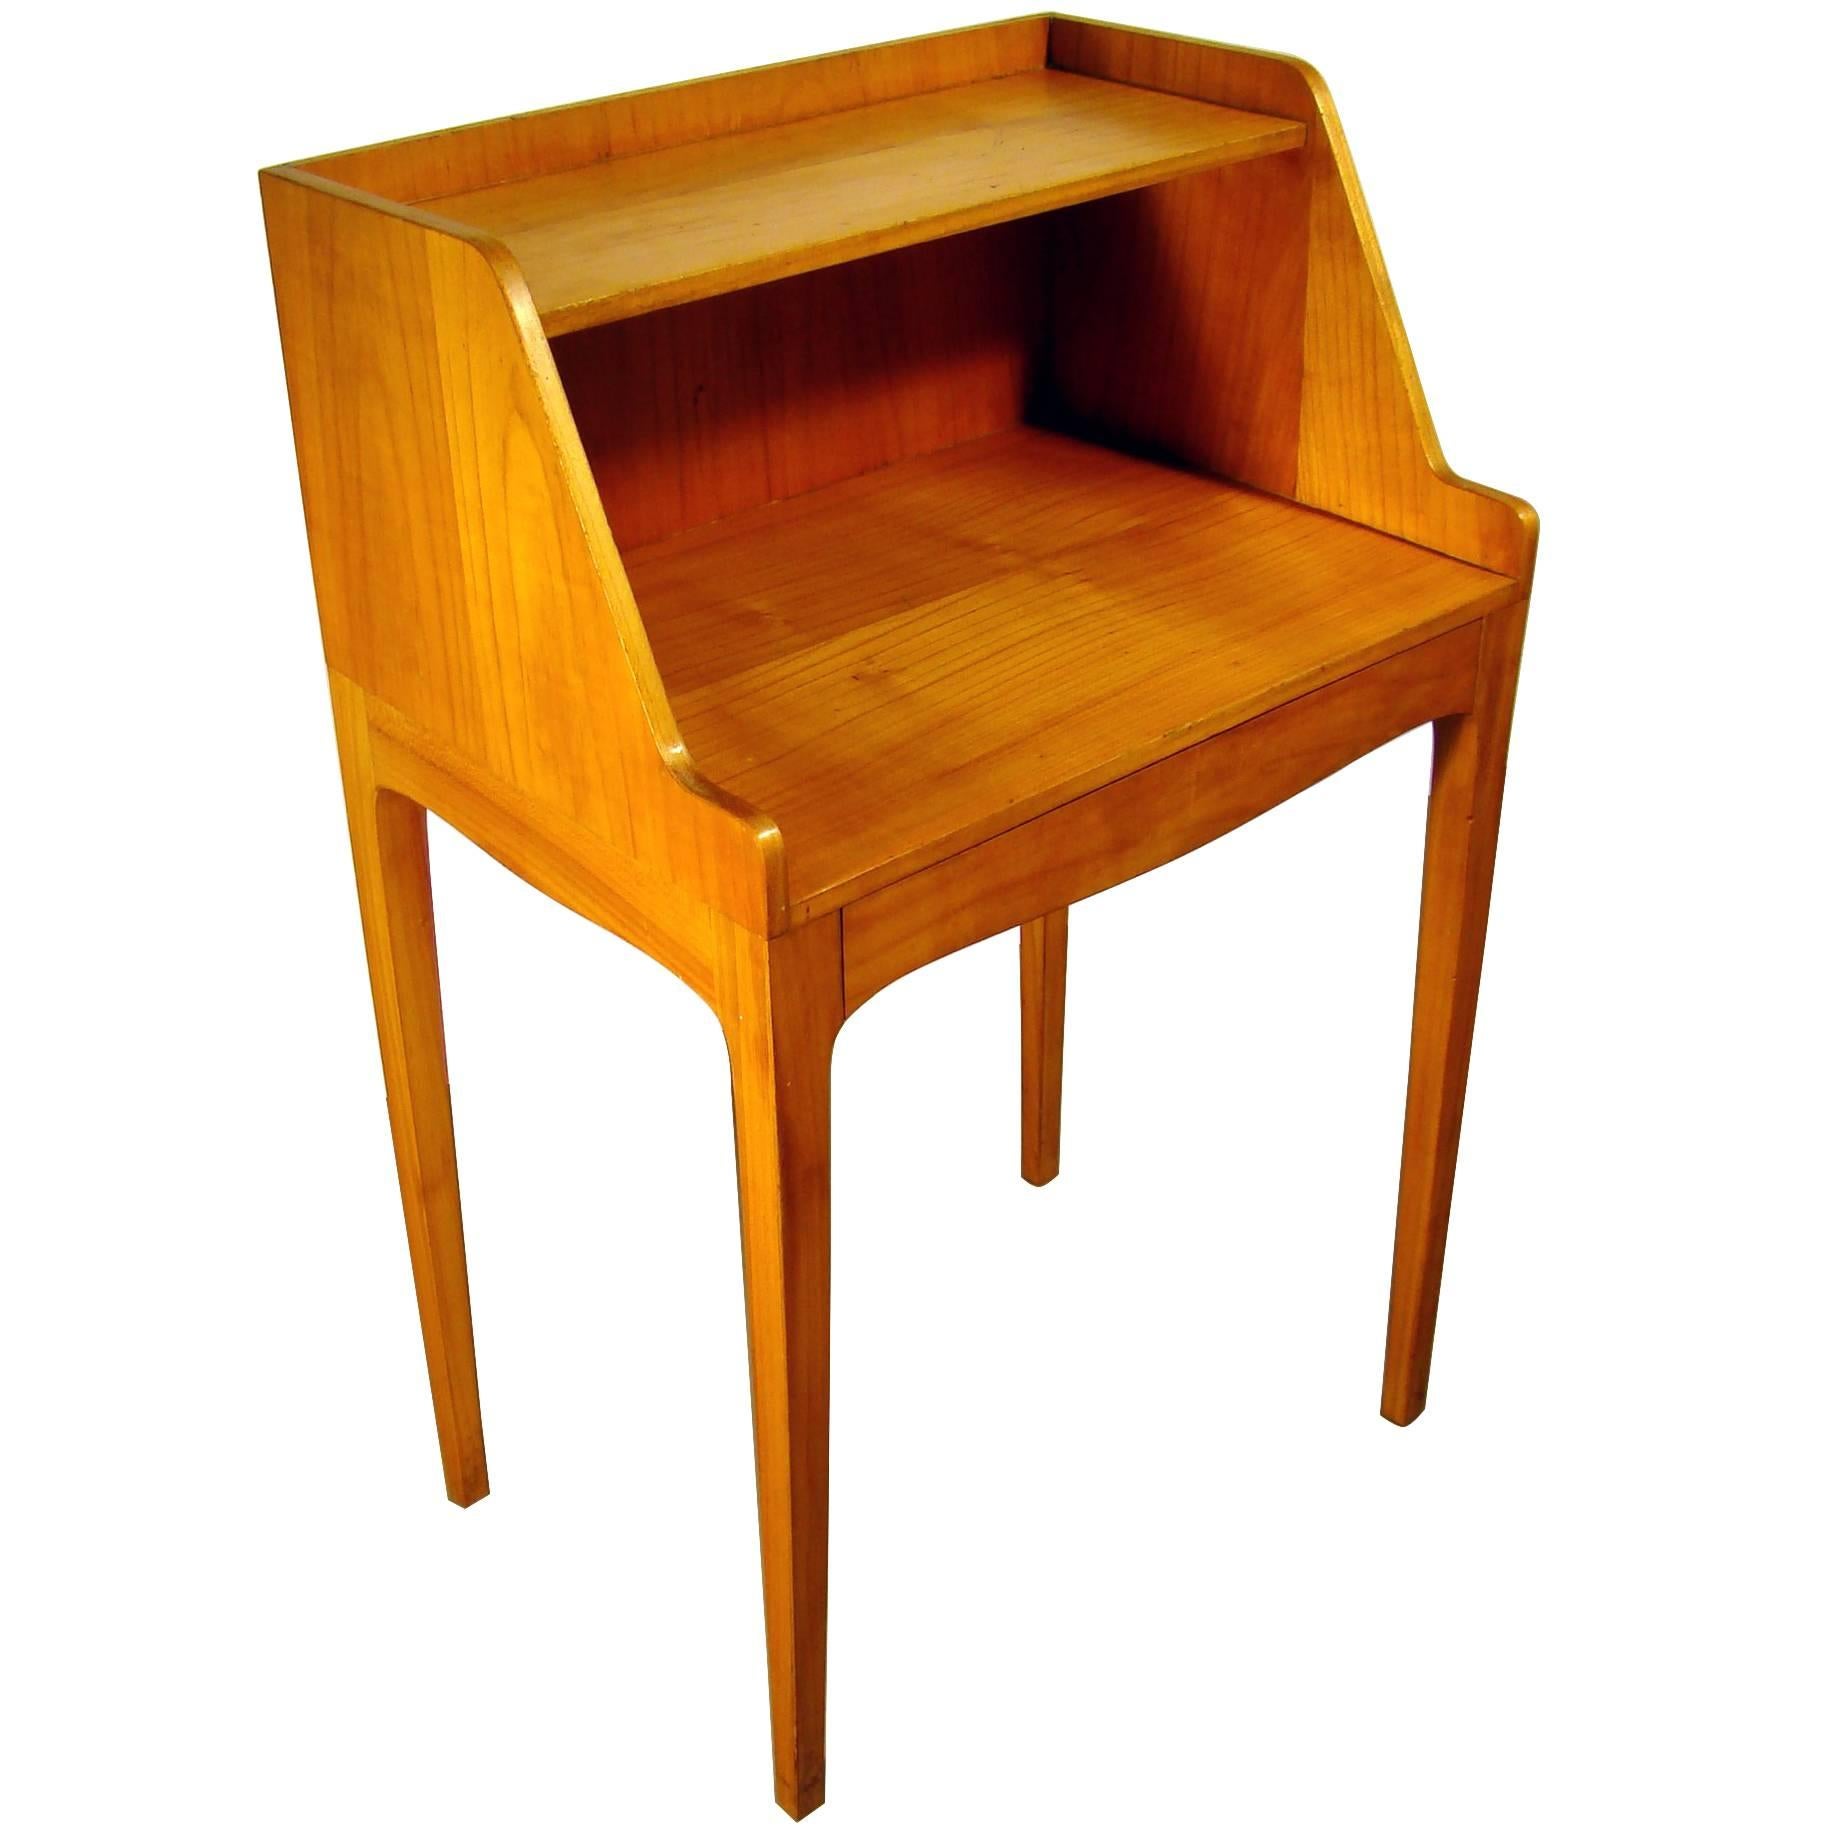 Italian Work Side Table in Solid and Veneer Cherry Wood, circa 1940-1950 For Sale